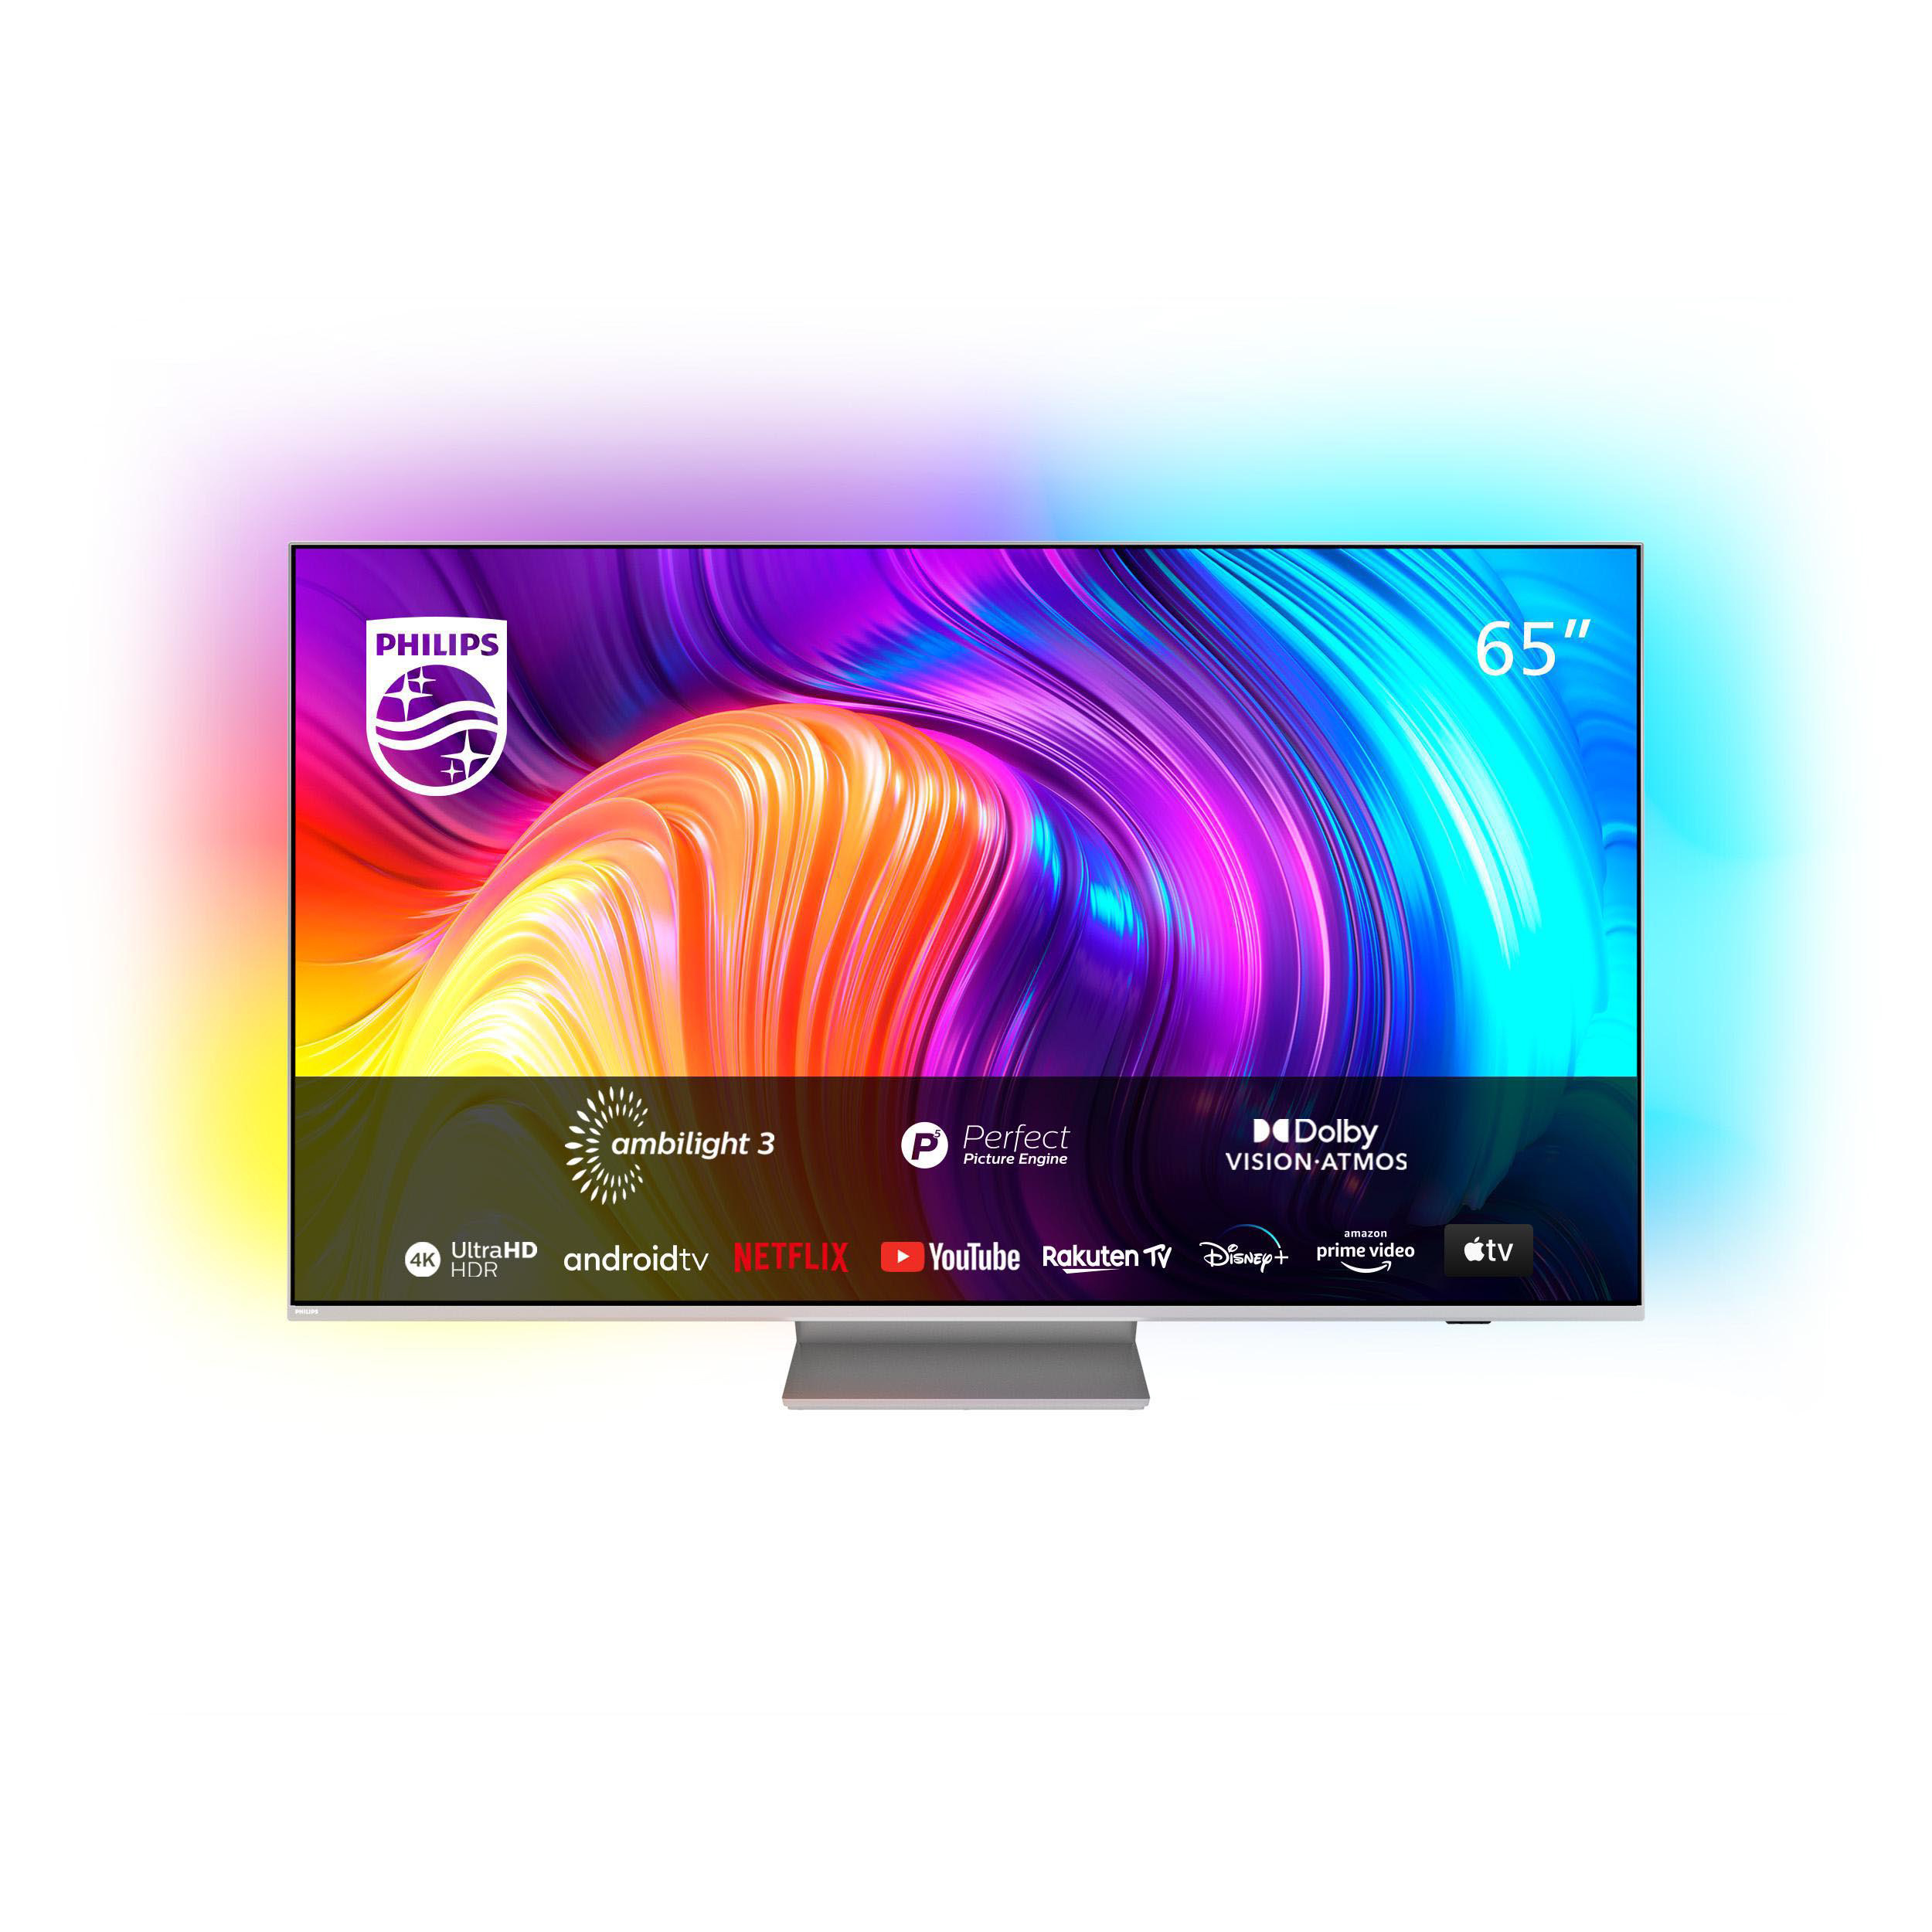 PHILIPS 65PUS8837/12 The Android Ambilight, One LED TV™ TV, Zoll 11 (Flat, SMART 65 TV UHD (R)) / 4K, cm, 164